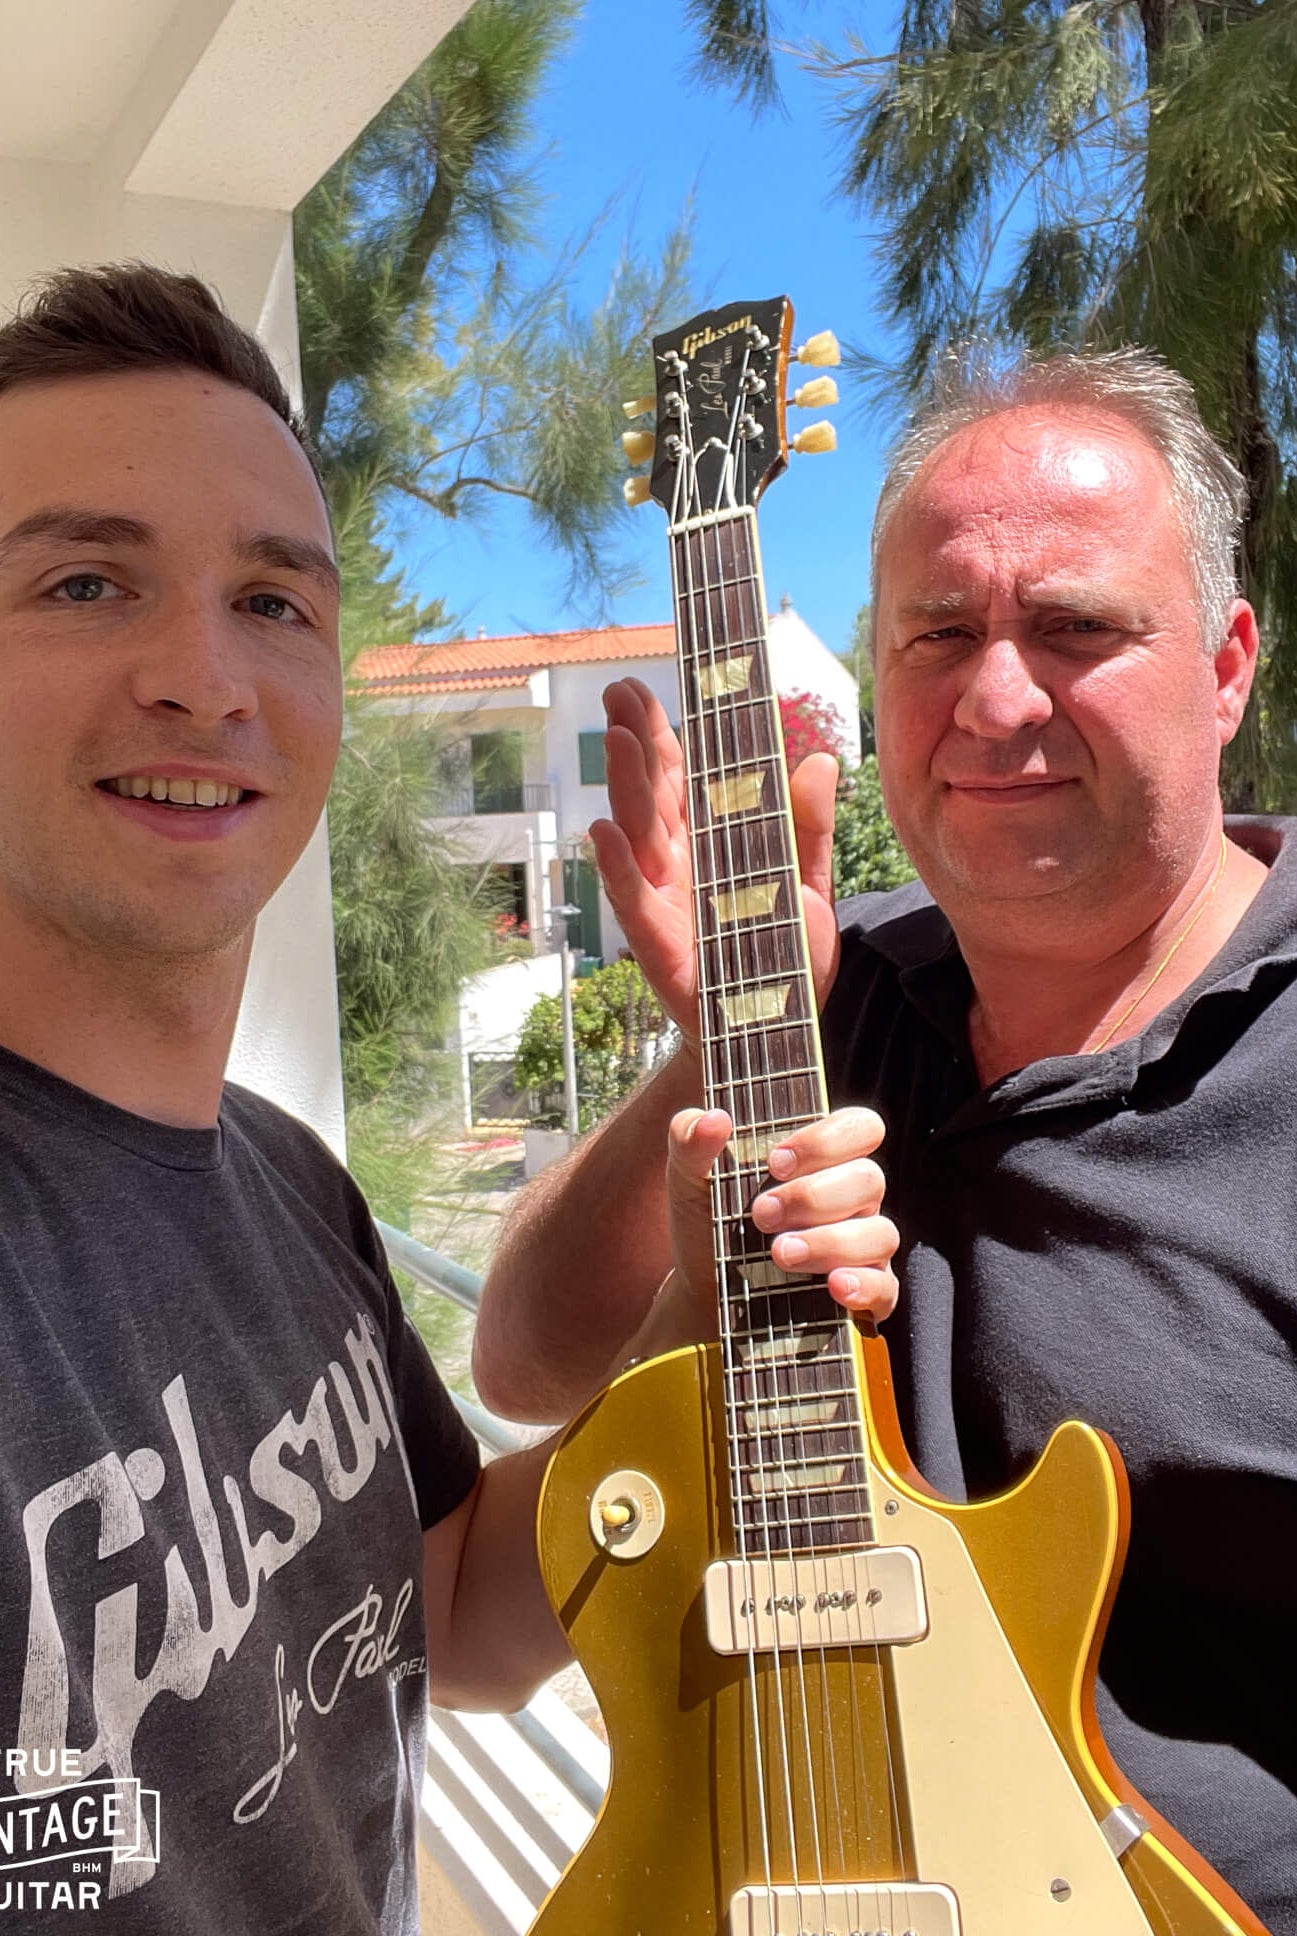 1950s Gibson Les Paul guitar buyer in Europe and Portugal